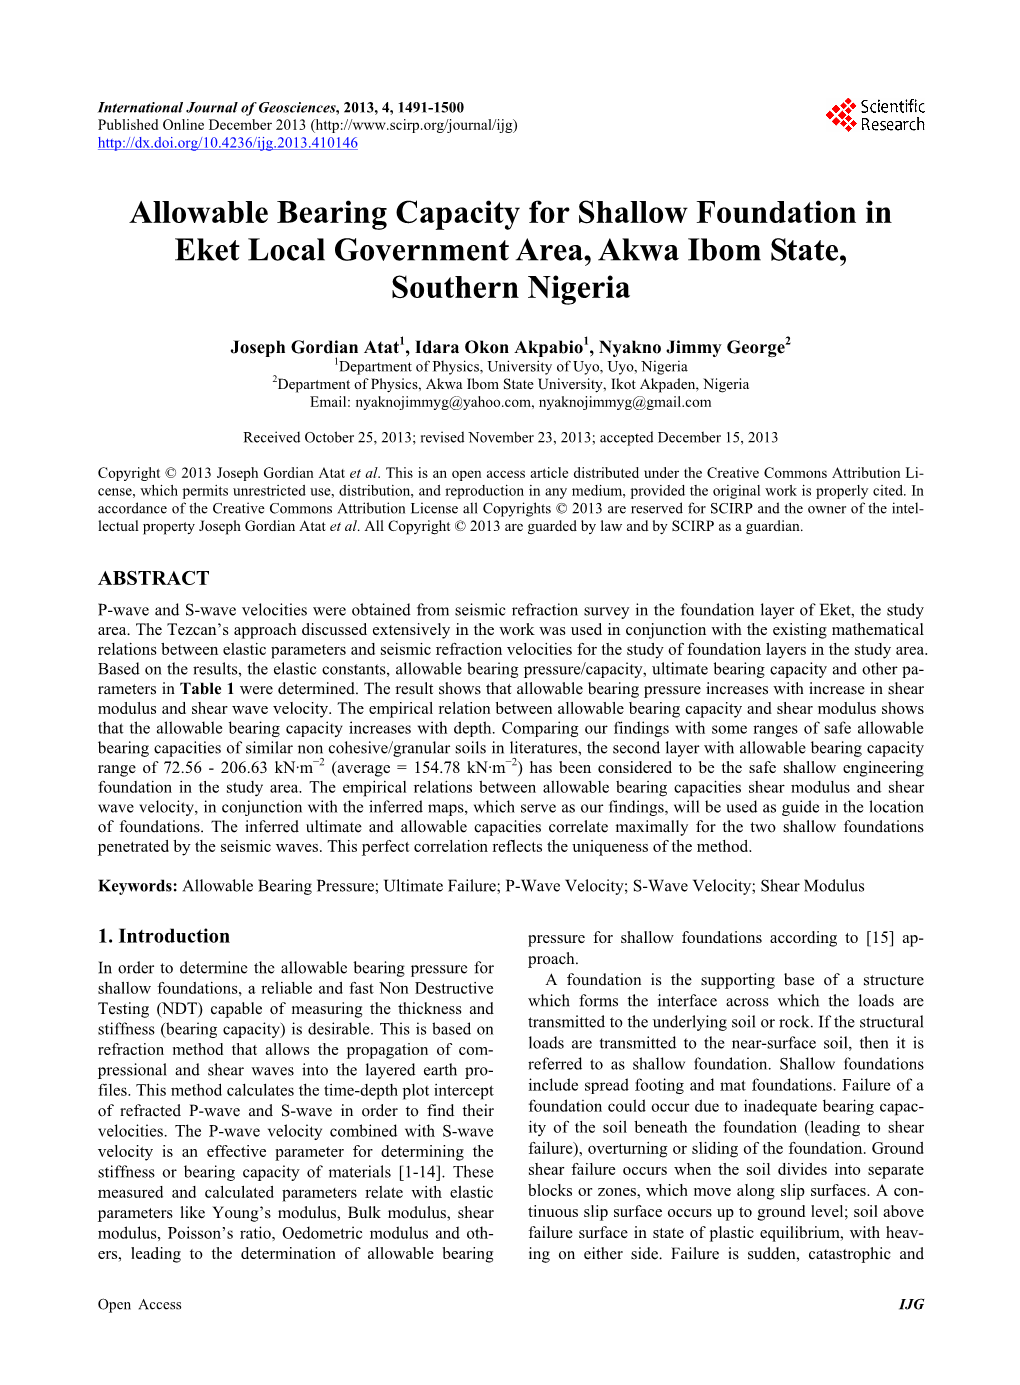 Allowable Bearing Capacity for Shallow Foundation in Eket Local Government Area, Akwa Ibom State, Southern Nigeria